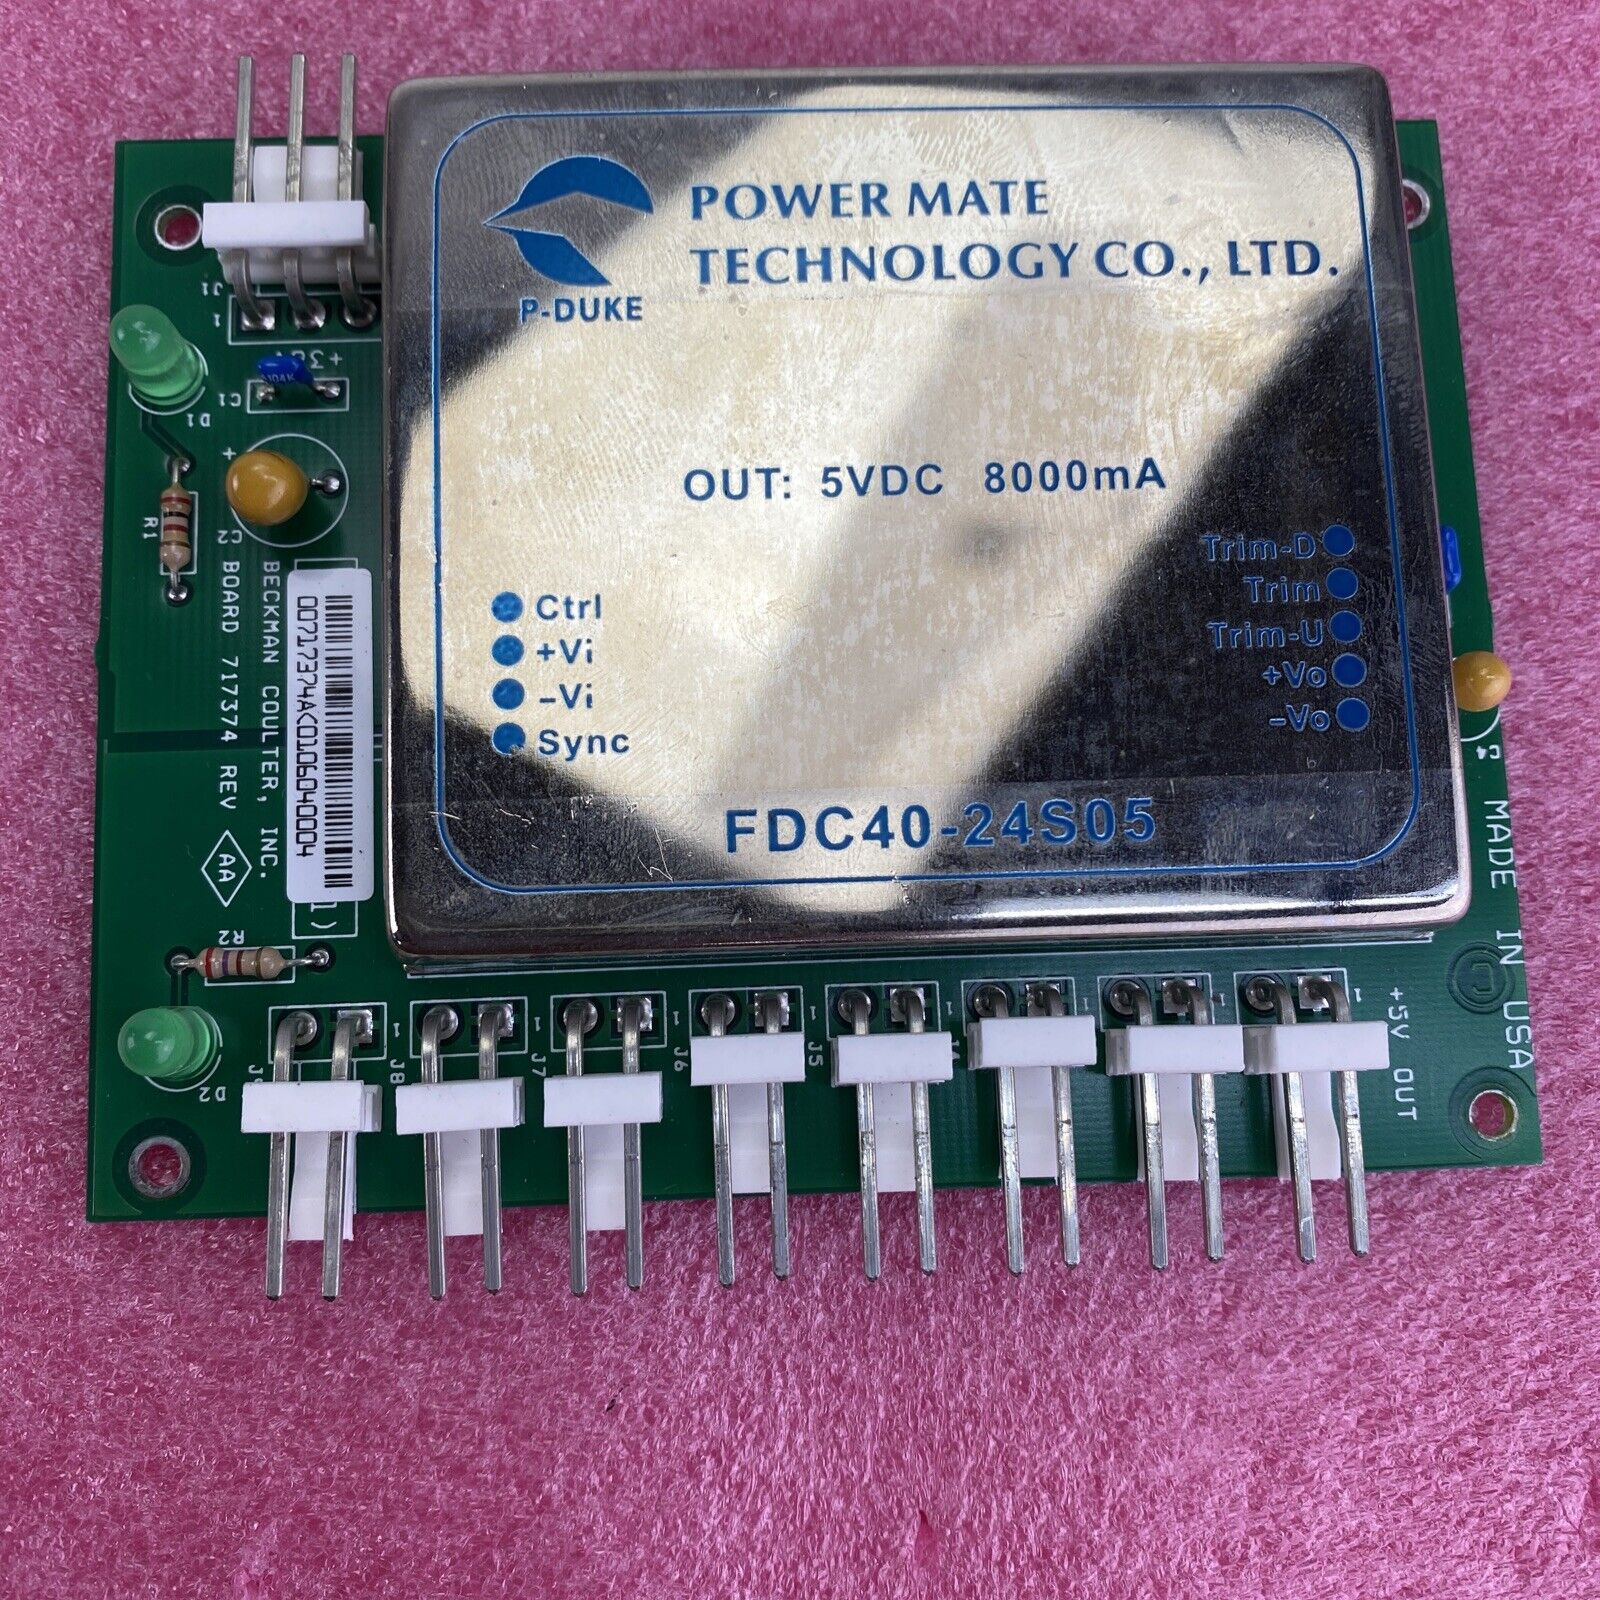 Beckman Coulter Power Mate FDC40-24S05 OUT: 5VDC 800mA